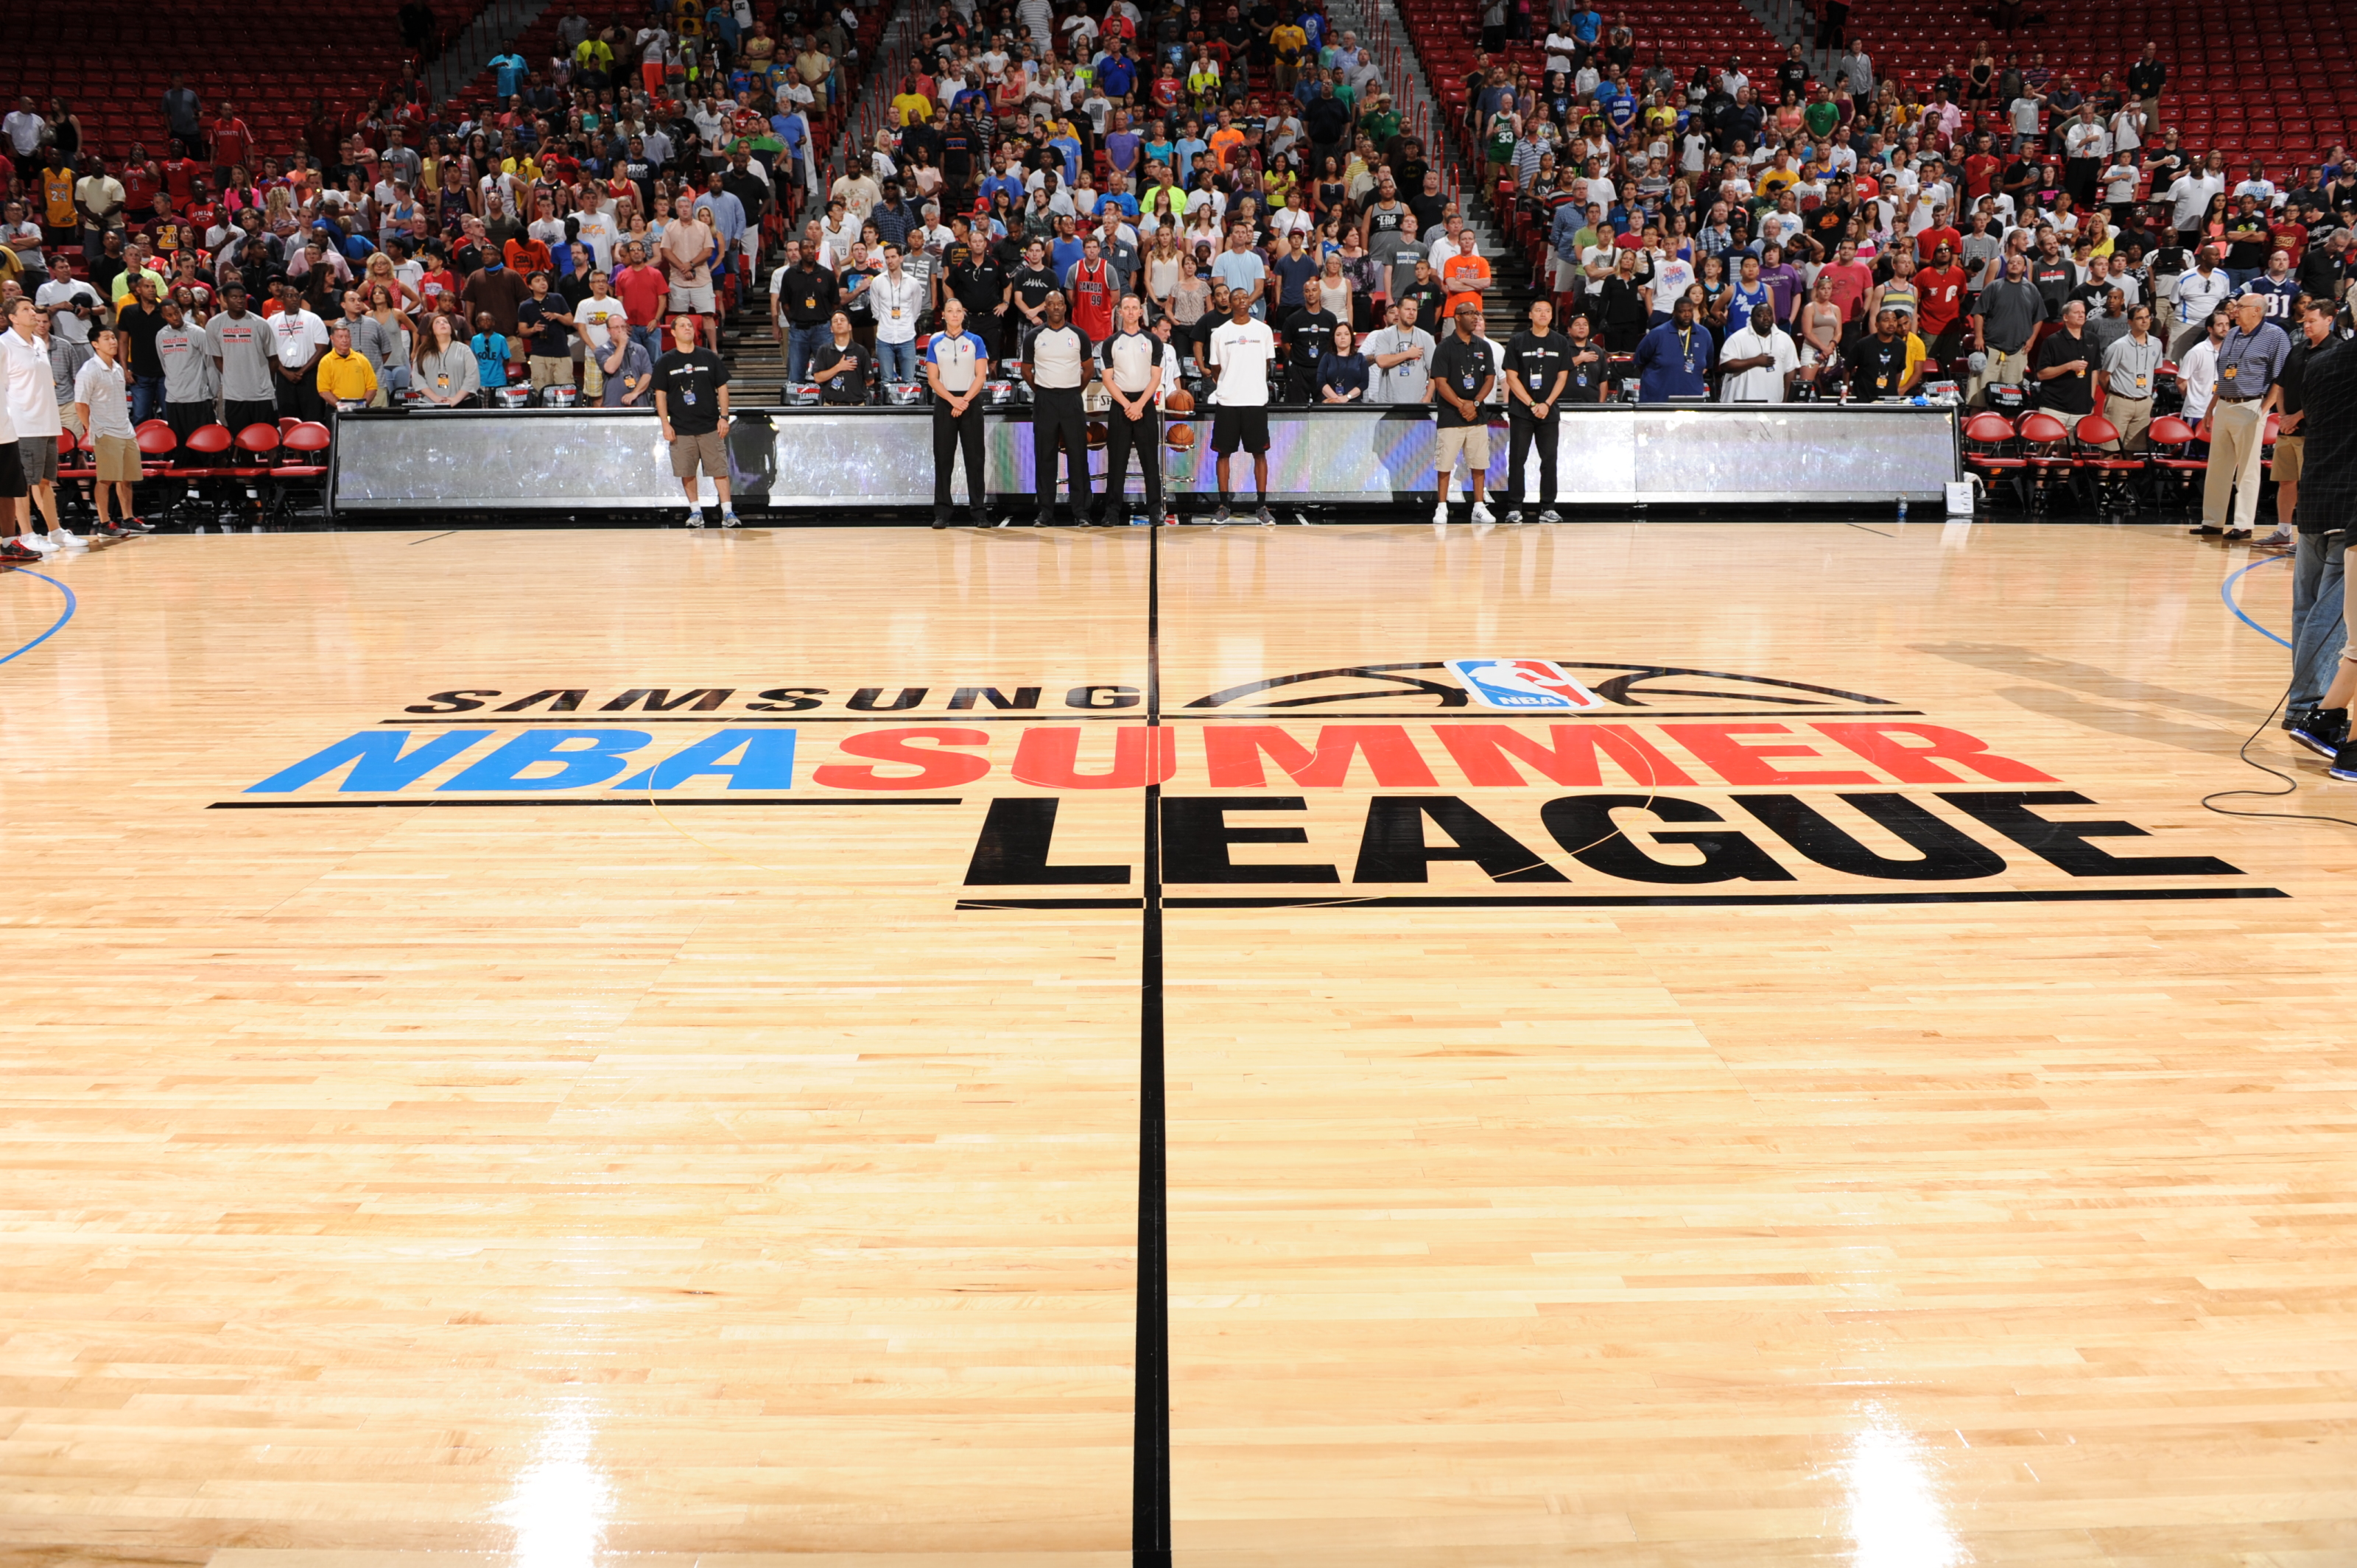 WHO'S WHO: CLIPPERS 2014 NBA SUMMER LEAGUE ROSTER